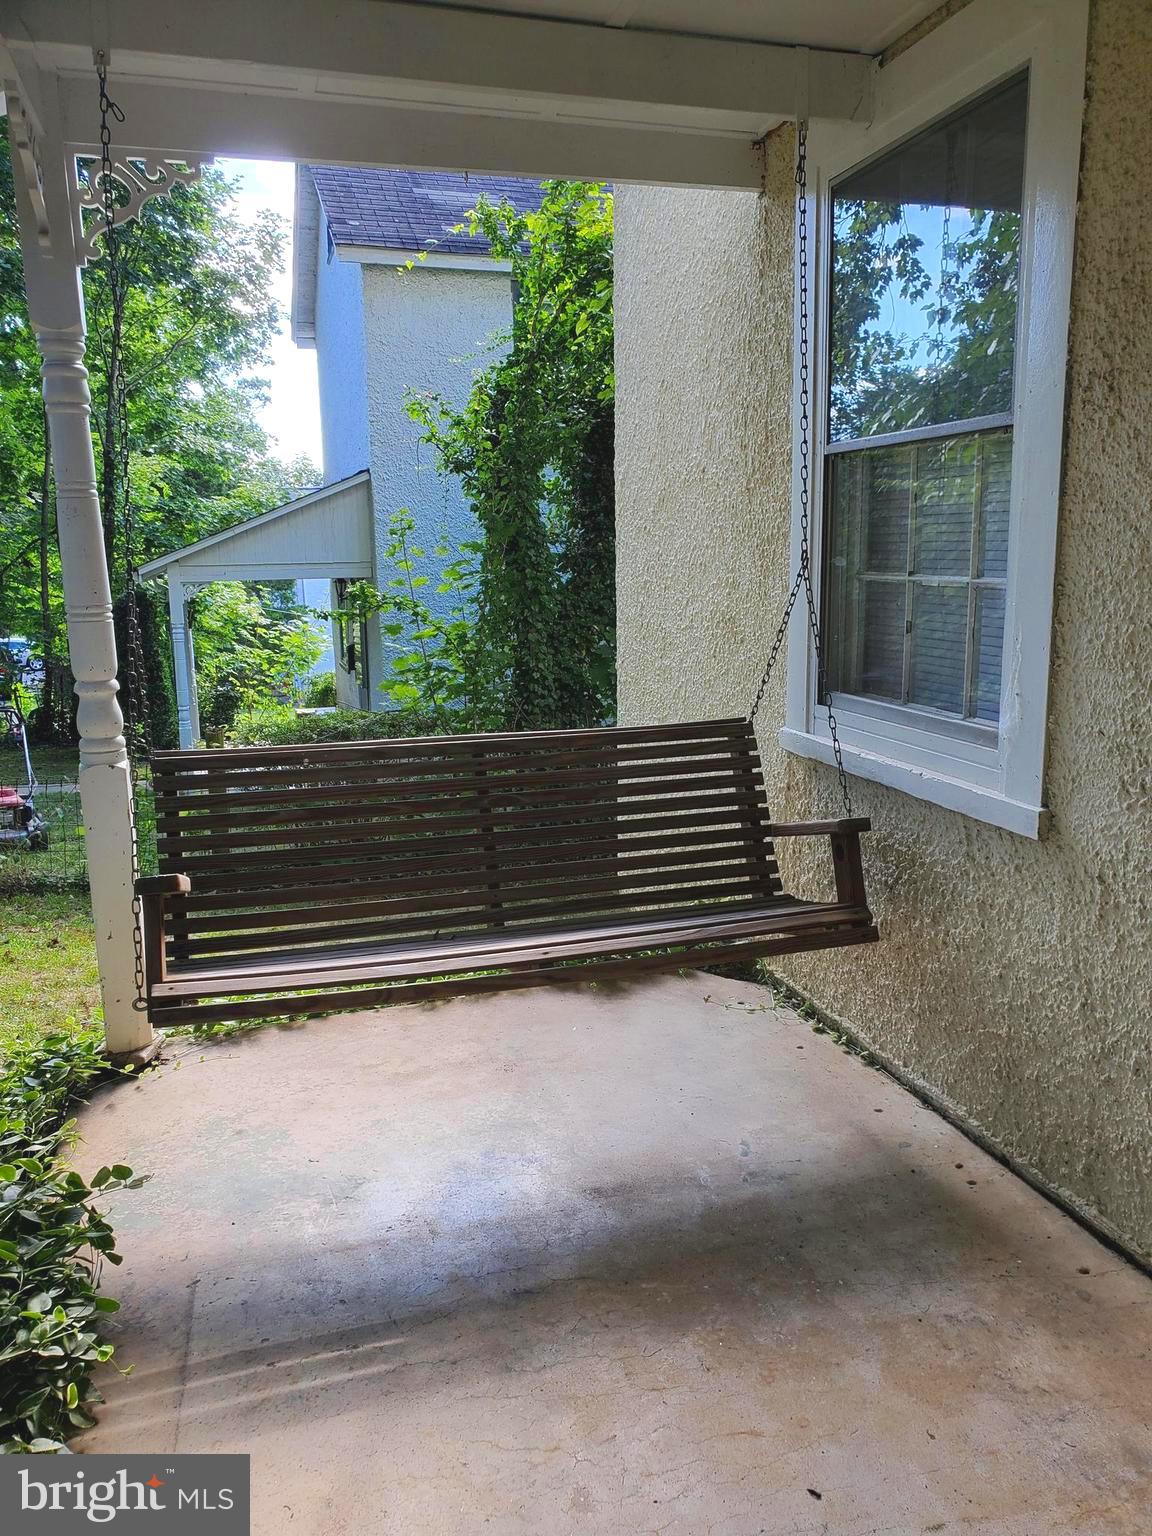 a view of bench in front of house